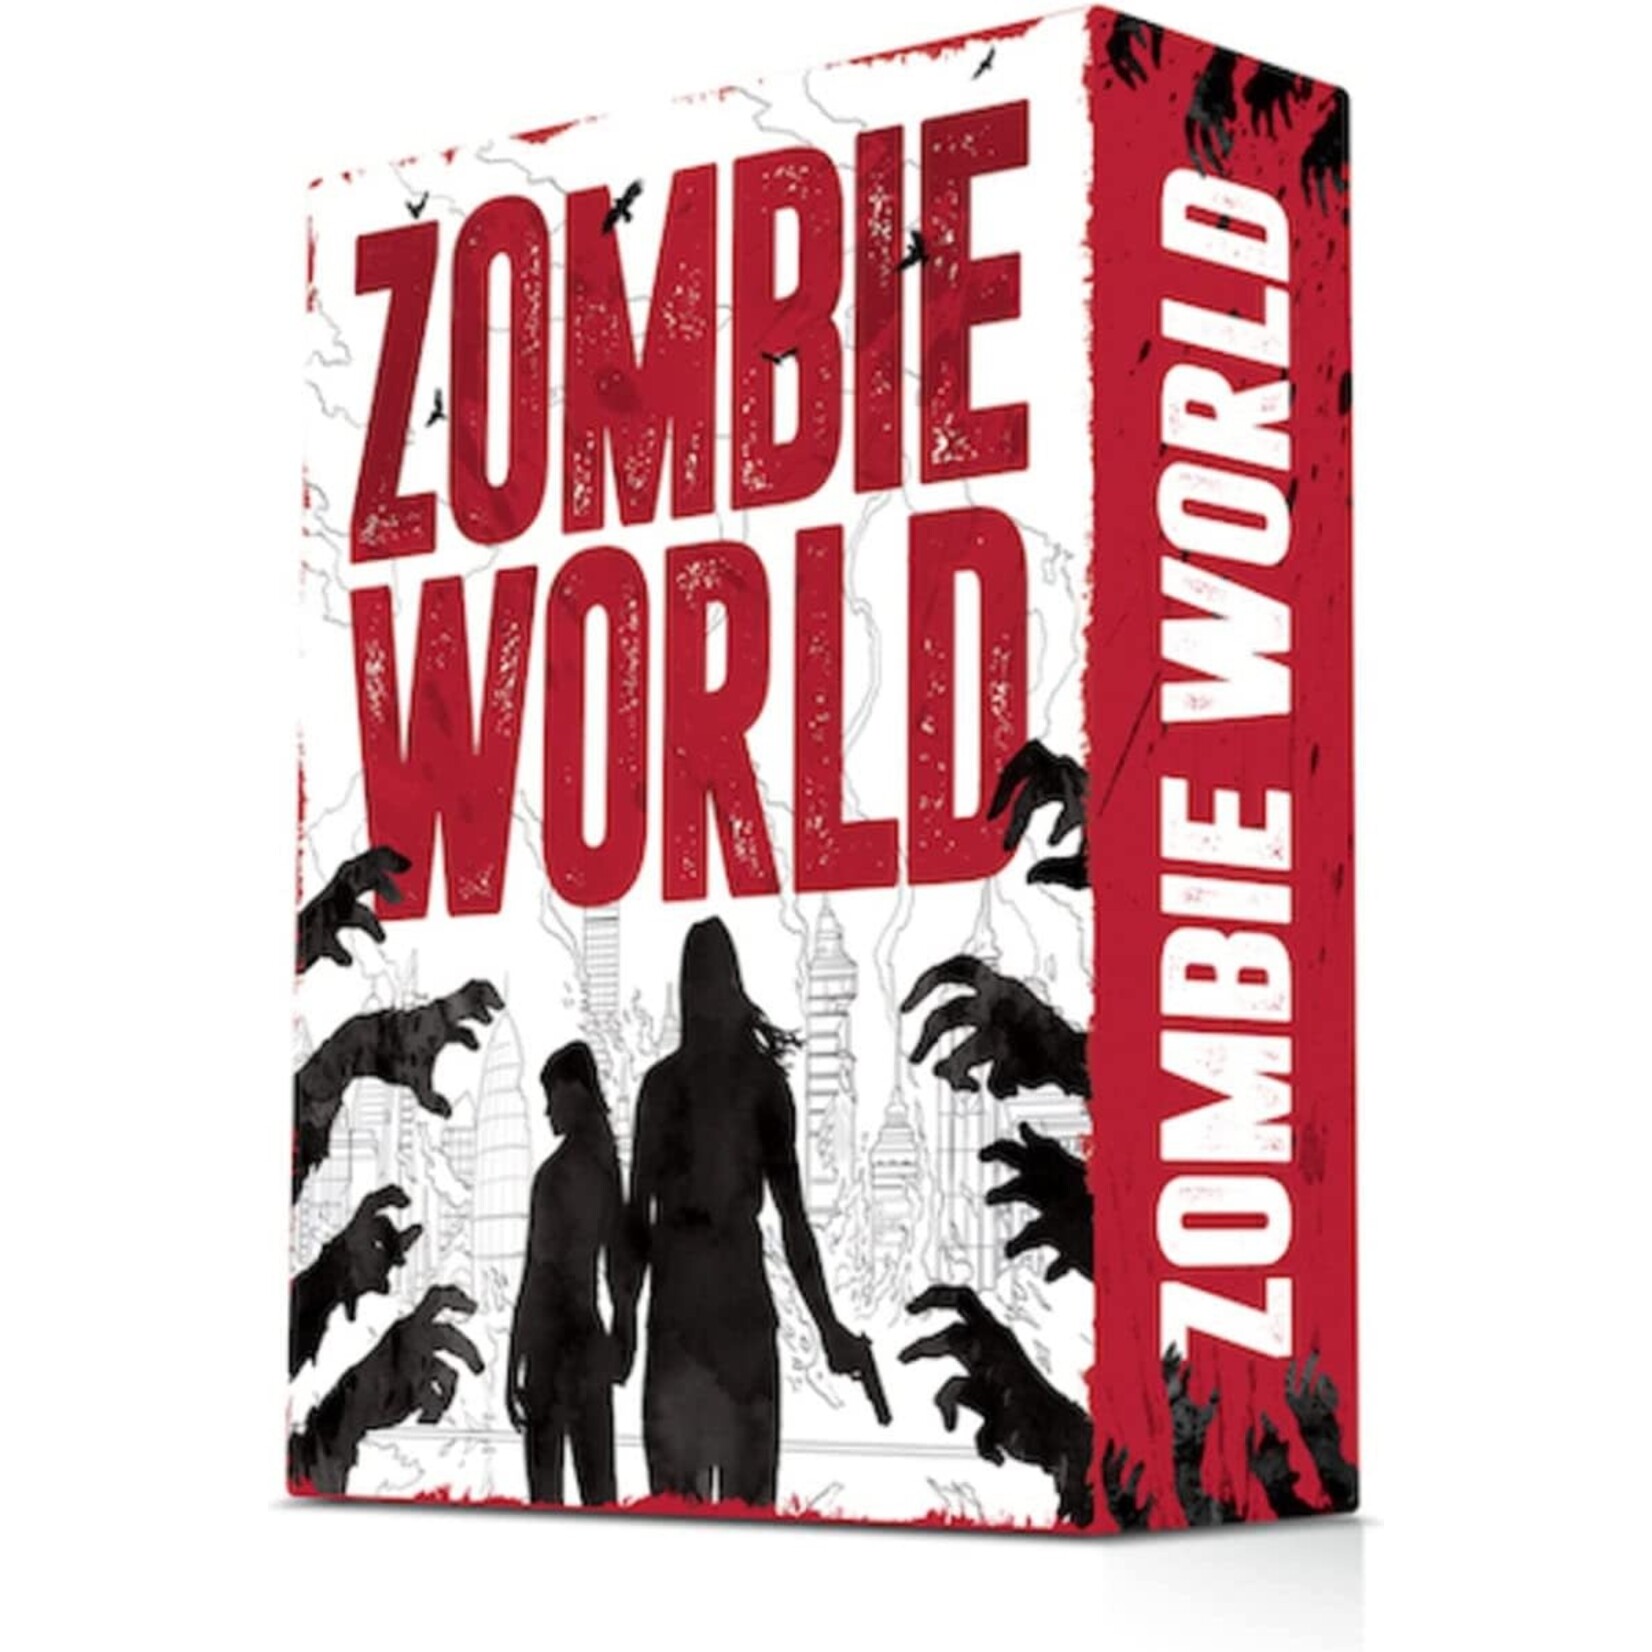 Magpie Games Zombie World RPG